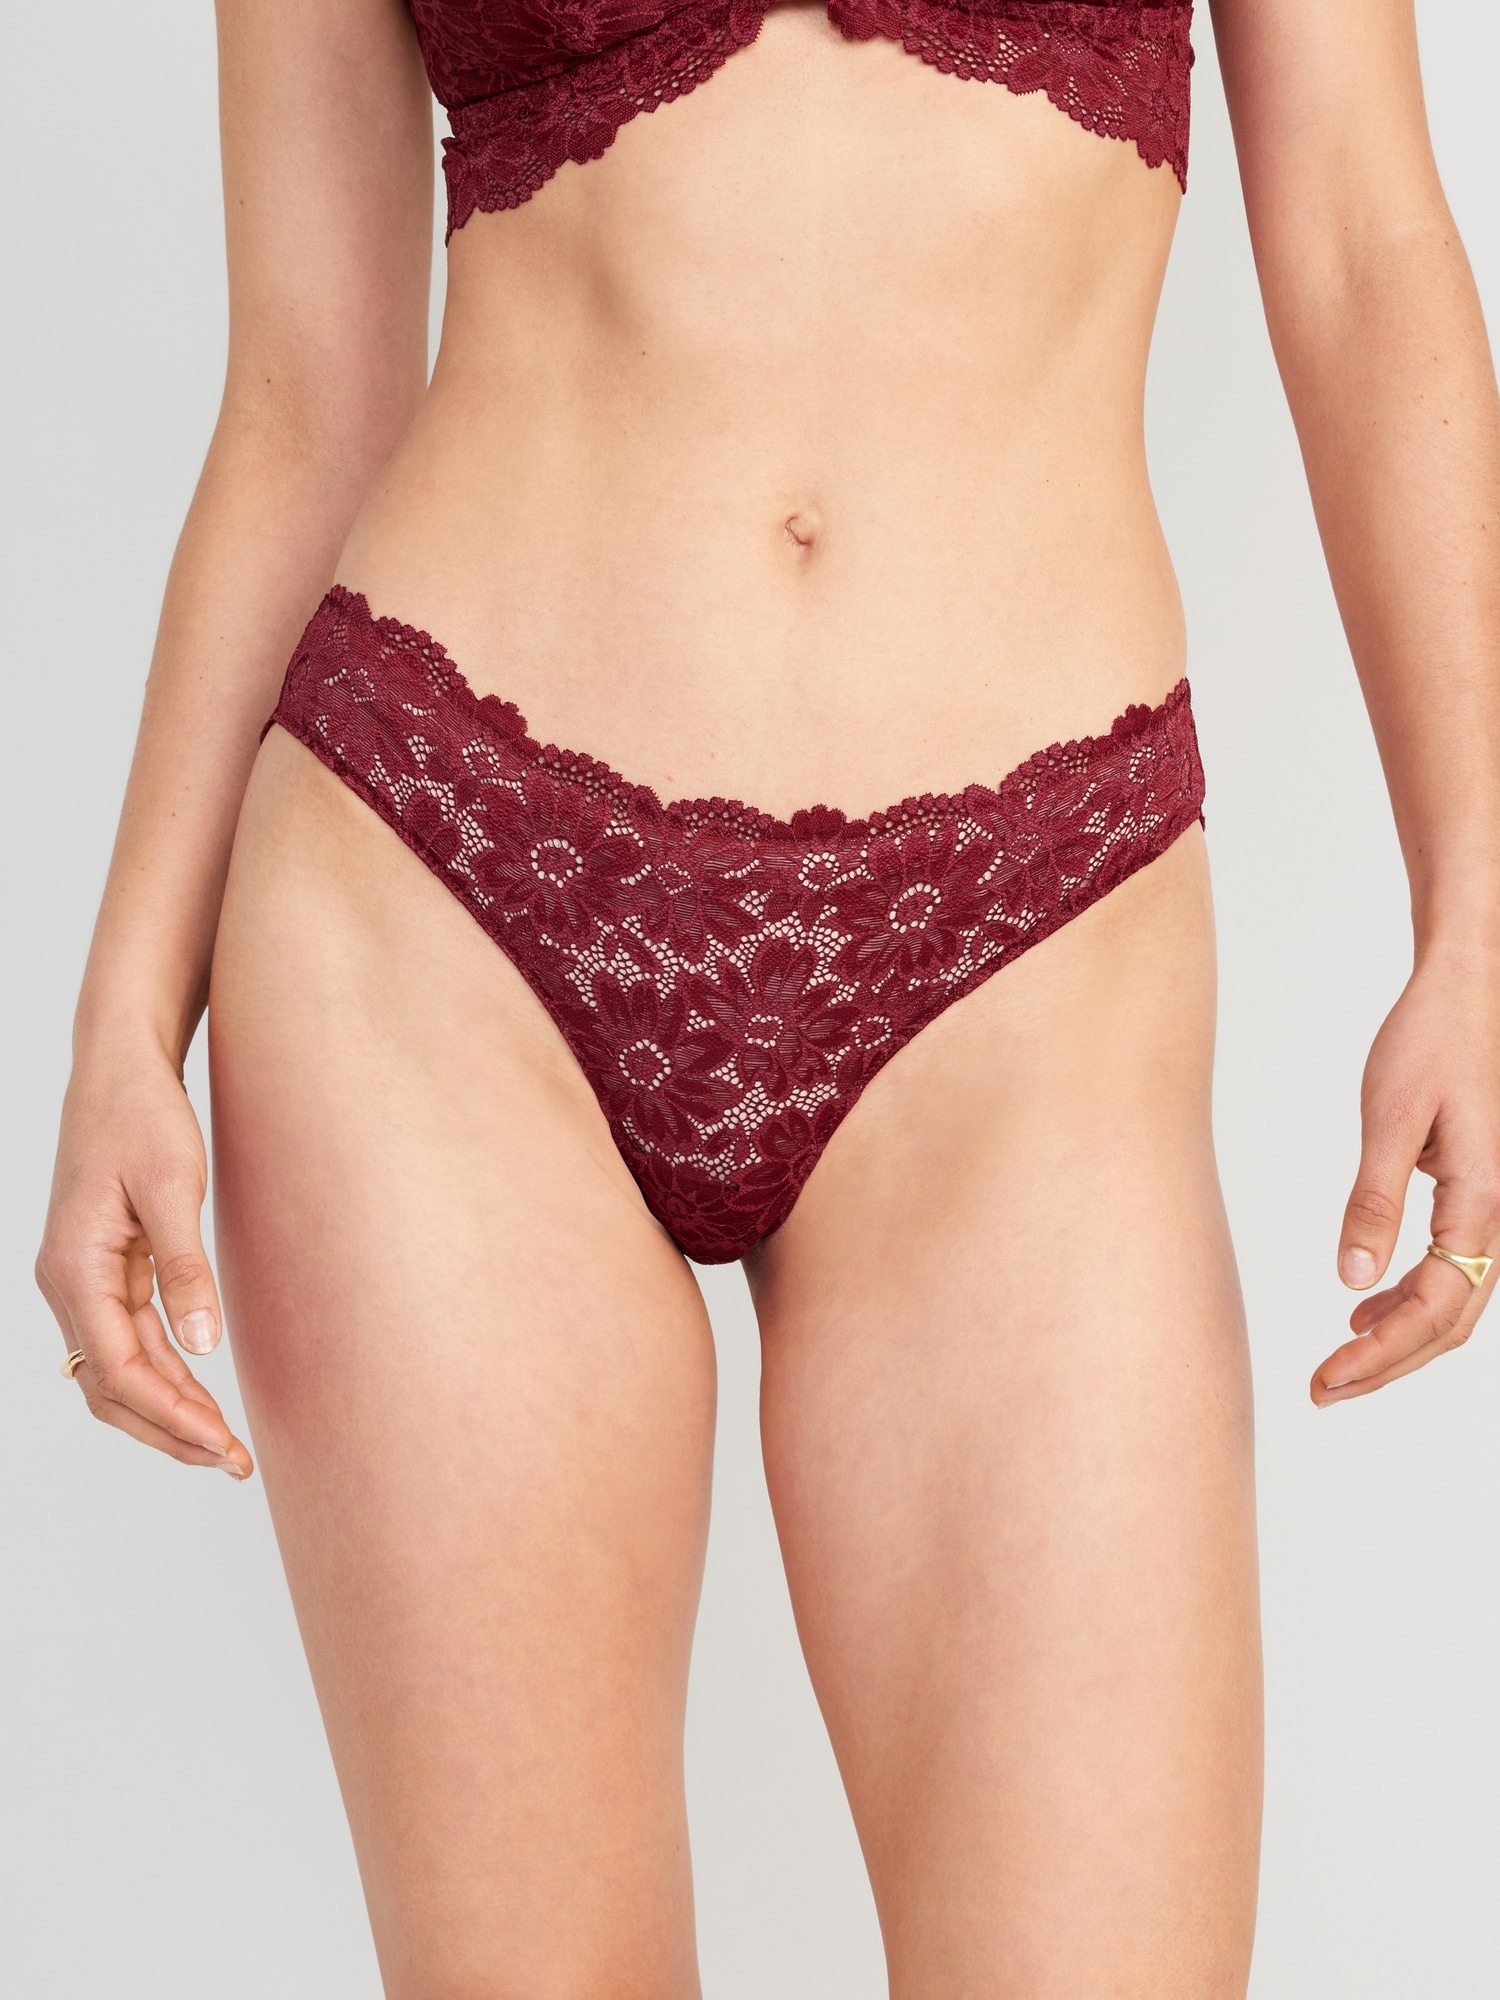 Mid-Rise Lace-Trimmed Bikini Underwear for Women - Old Navy